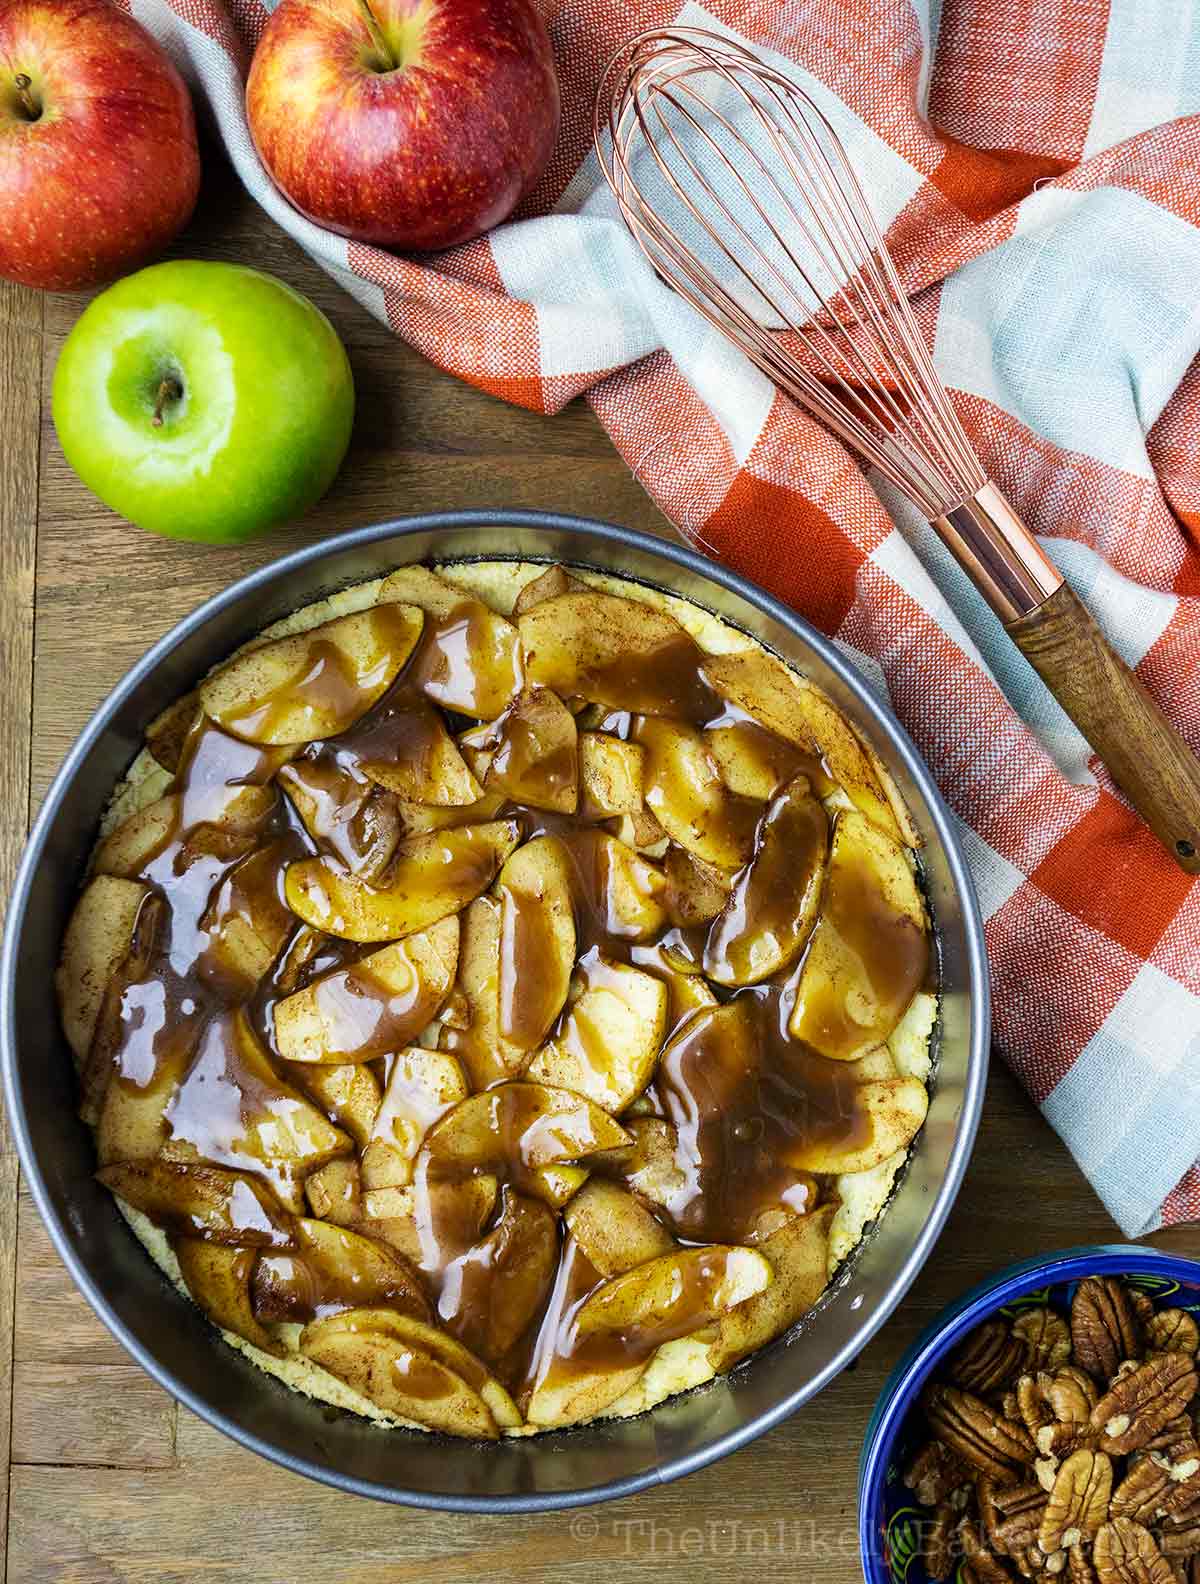 Apple and salted caramel layer.